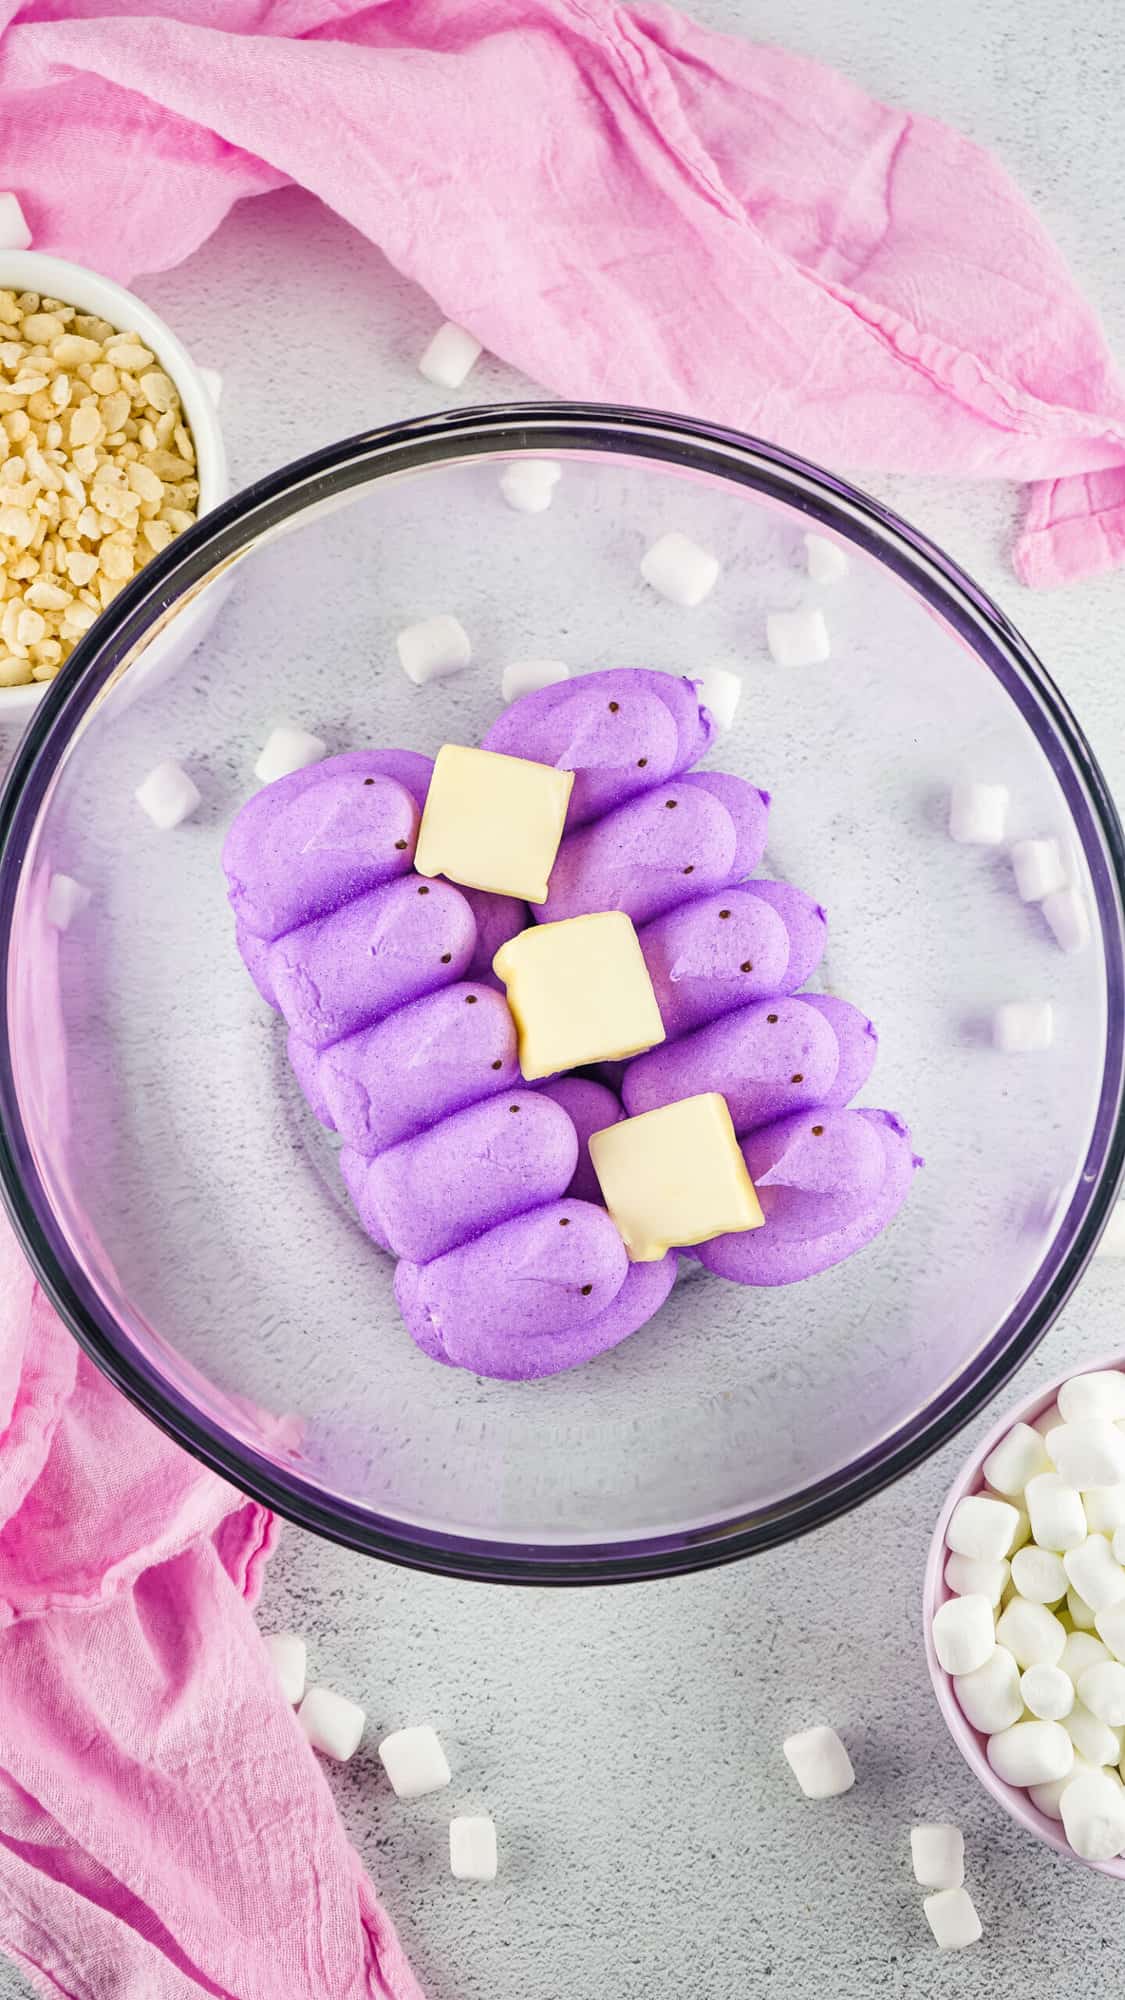 Put each packet of Peeps in separate bowls with butter and mini marshmallows.